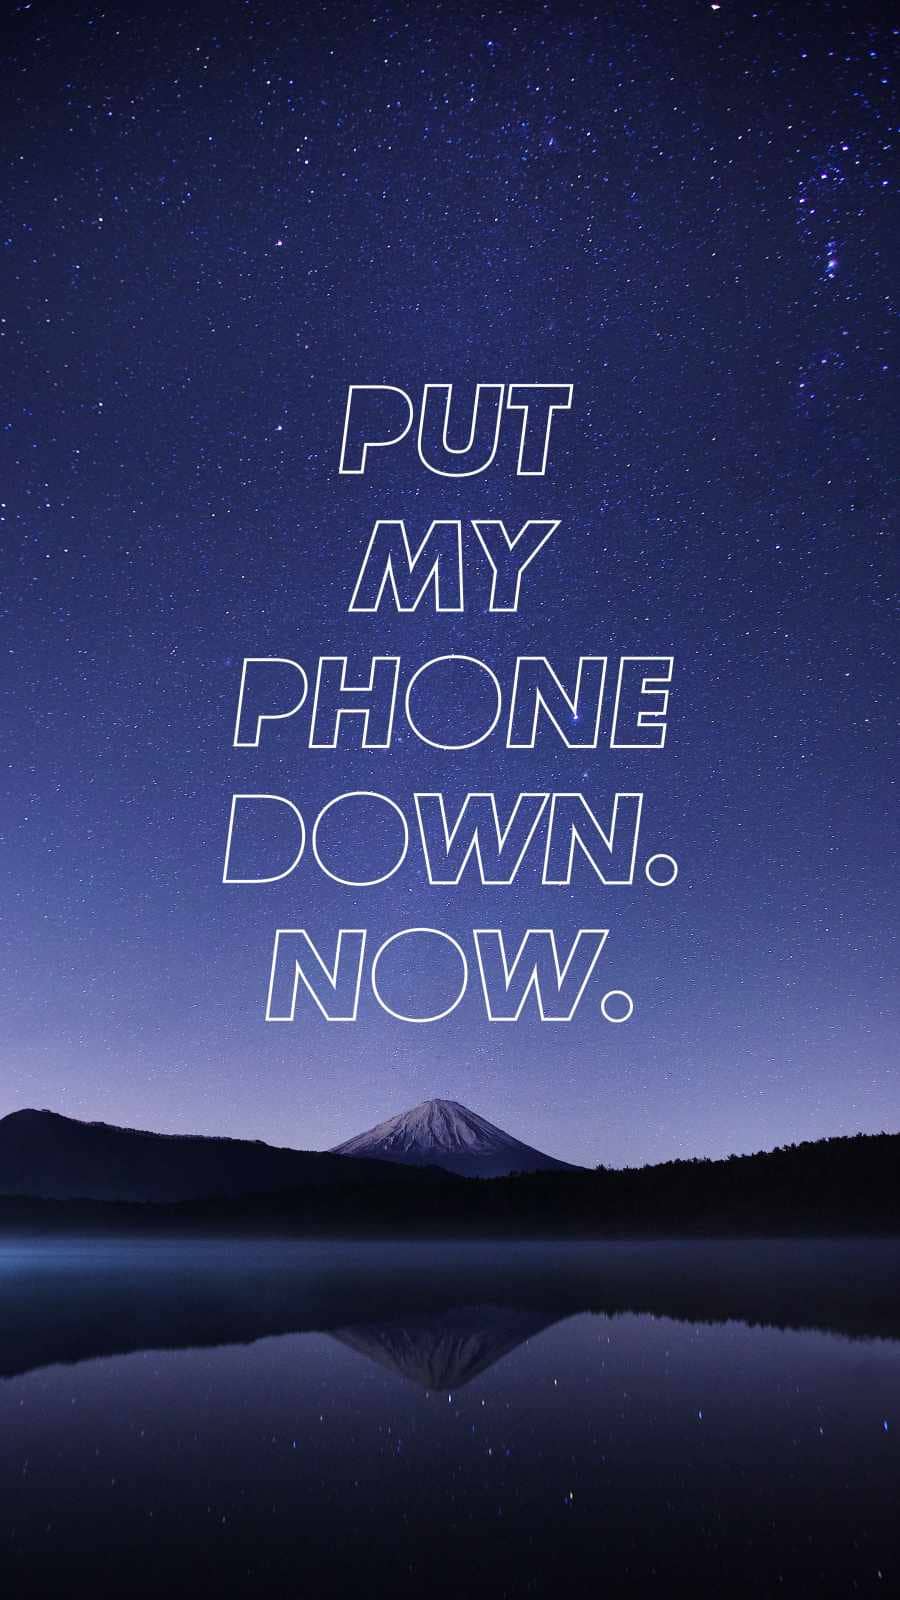 Put My Phone Down Now Quote wallpaper iphone, Best iPhone Wallpaper and iPhone background, WallpaperUpdate, Best iPhone Wallpaper and iPhone background